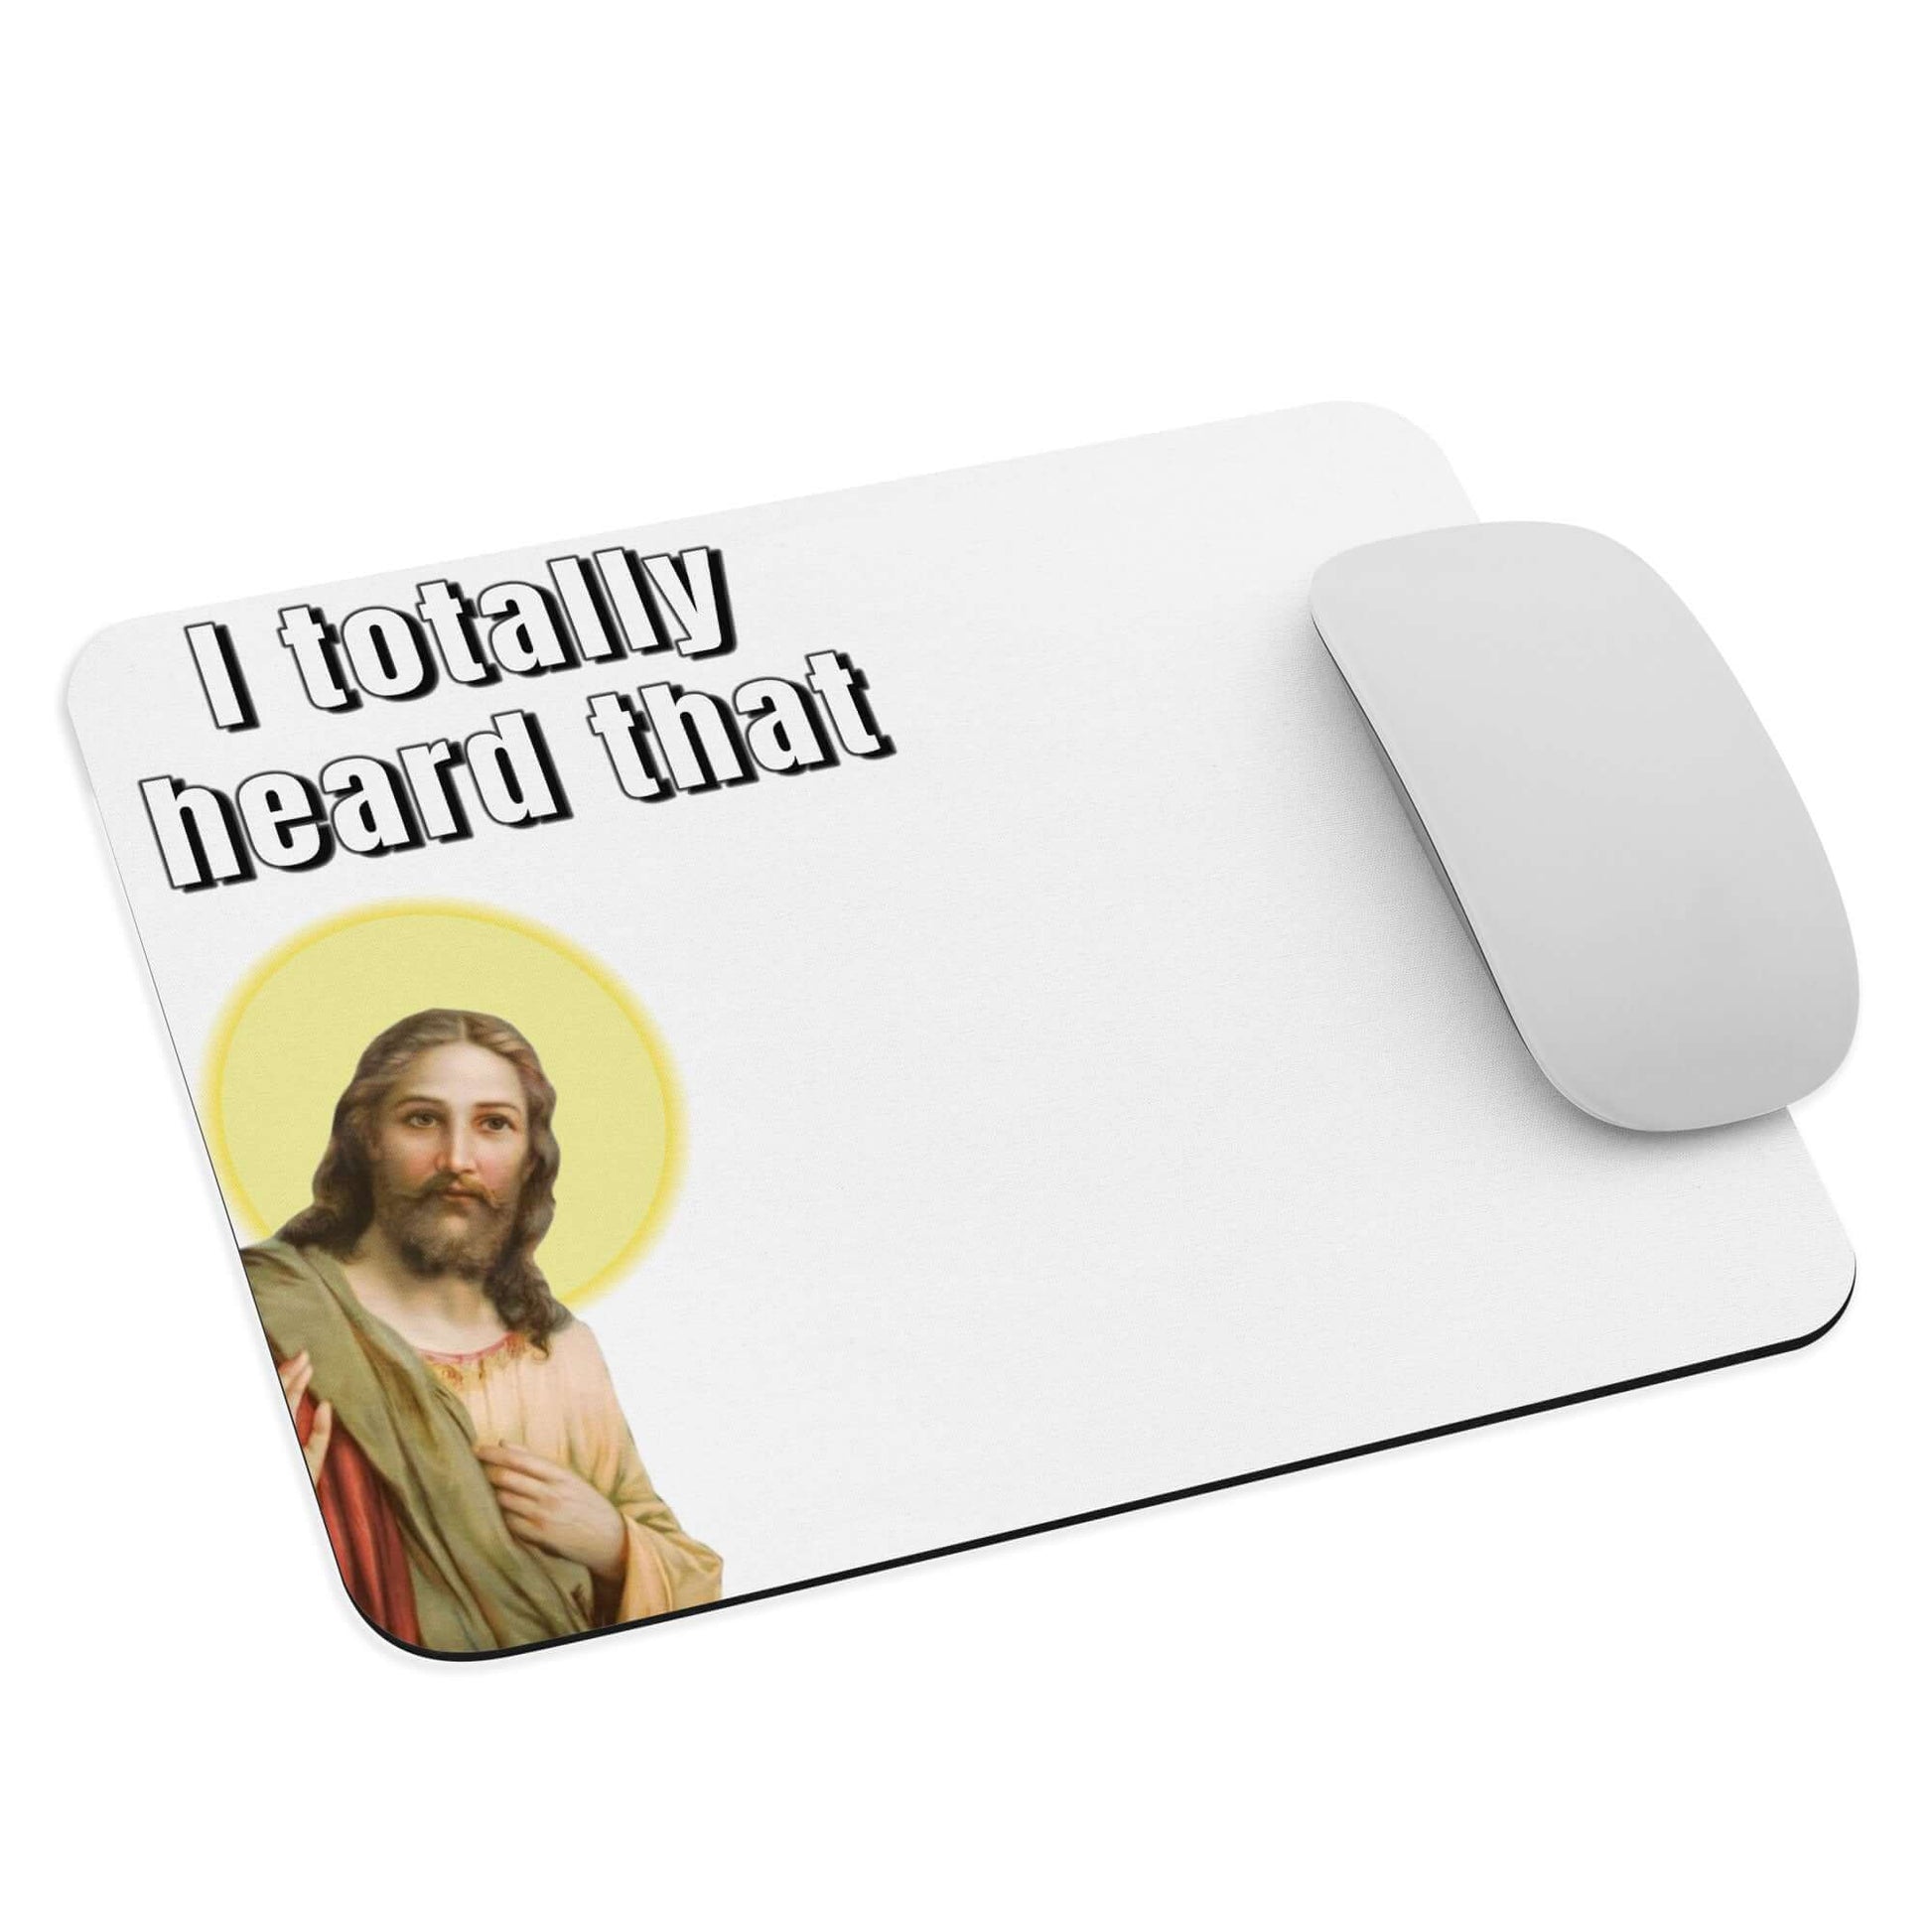 Jesus - I totally heard that - Mouse pad - Horrible Designs